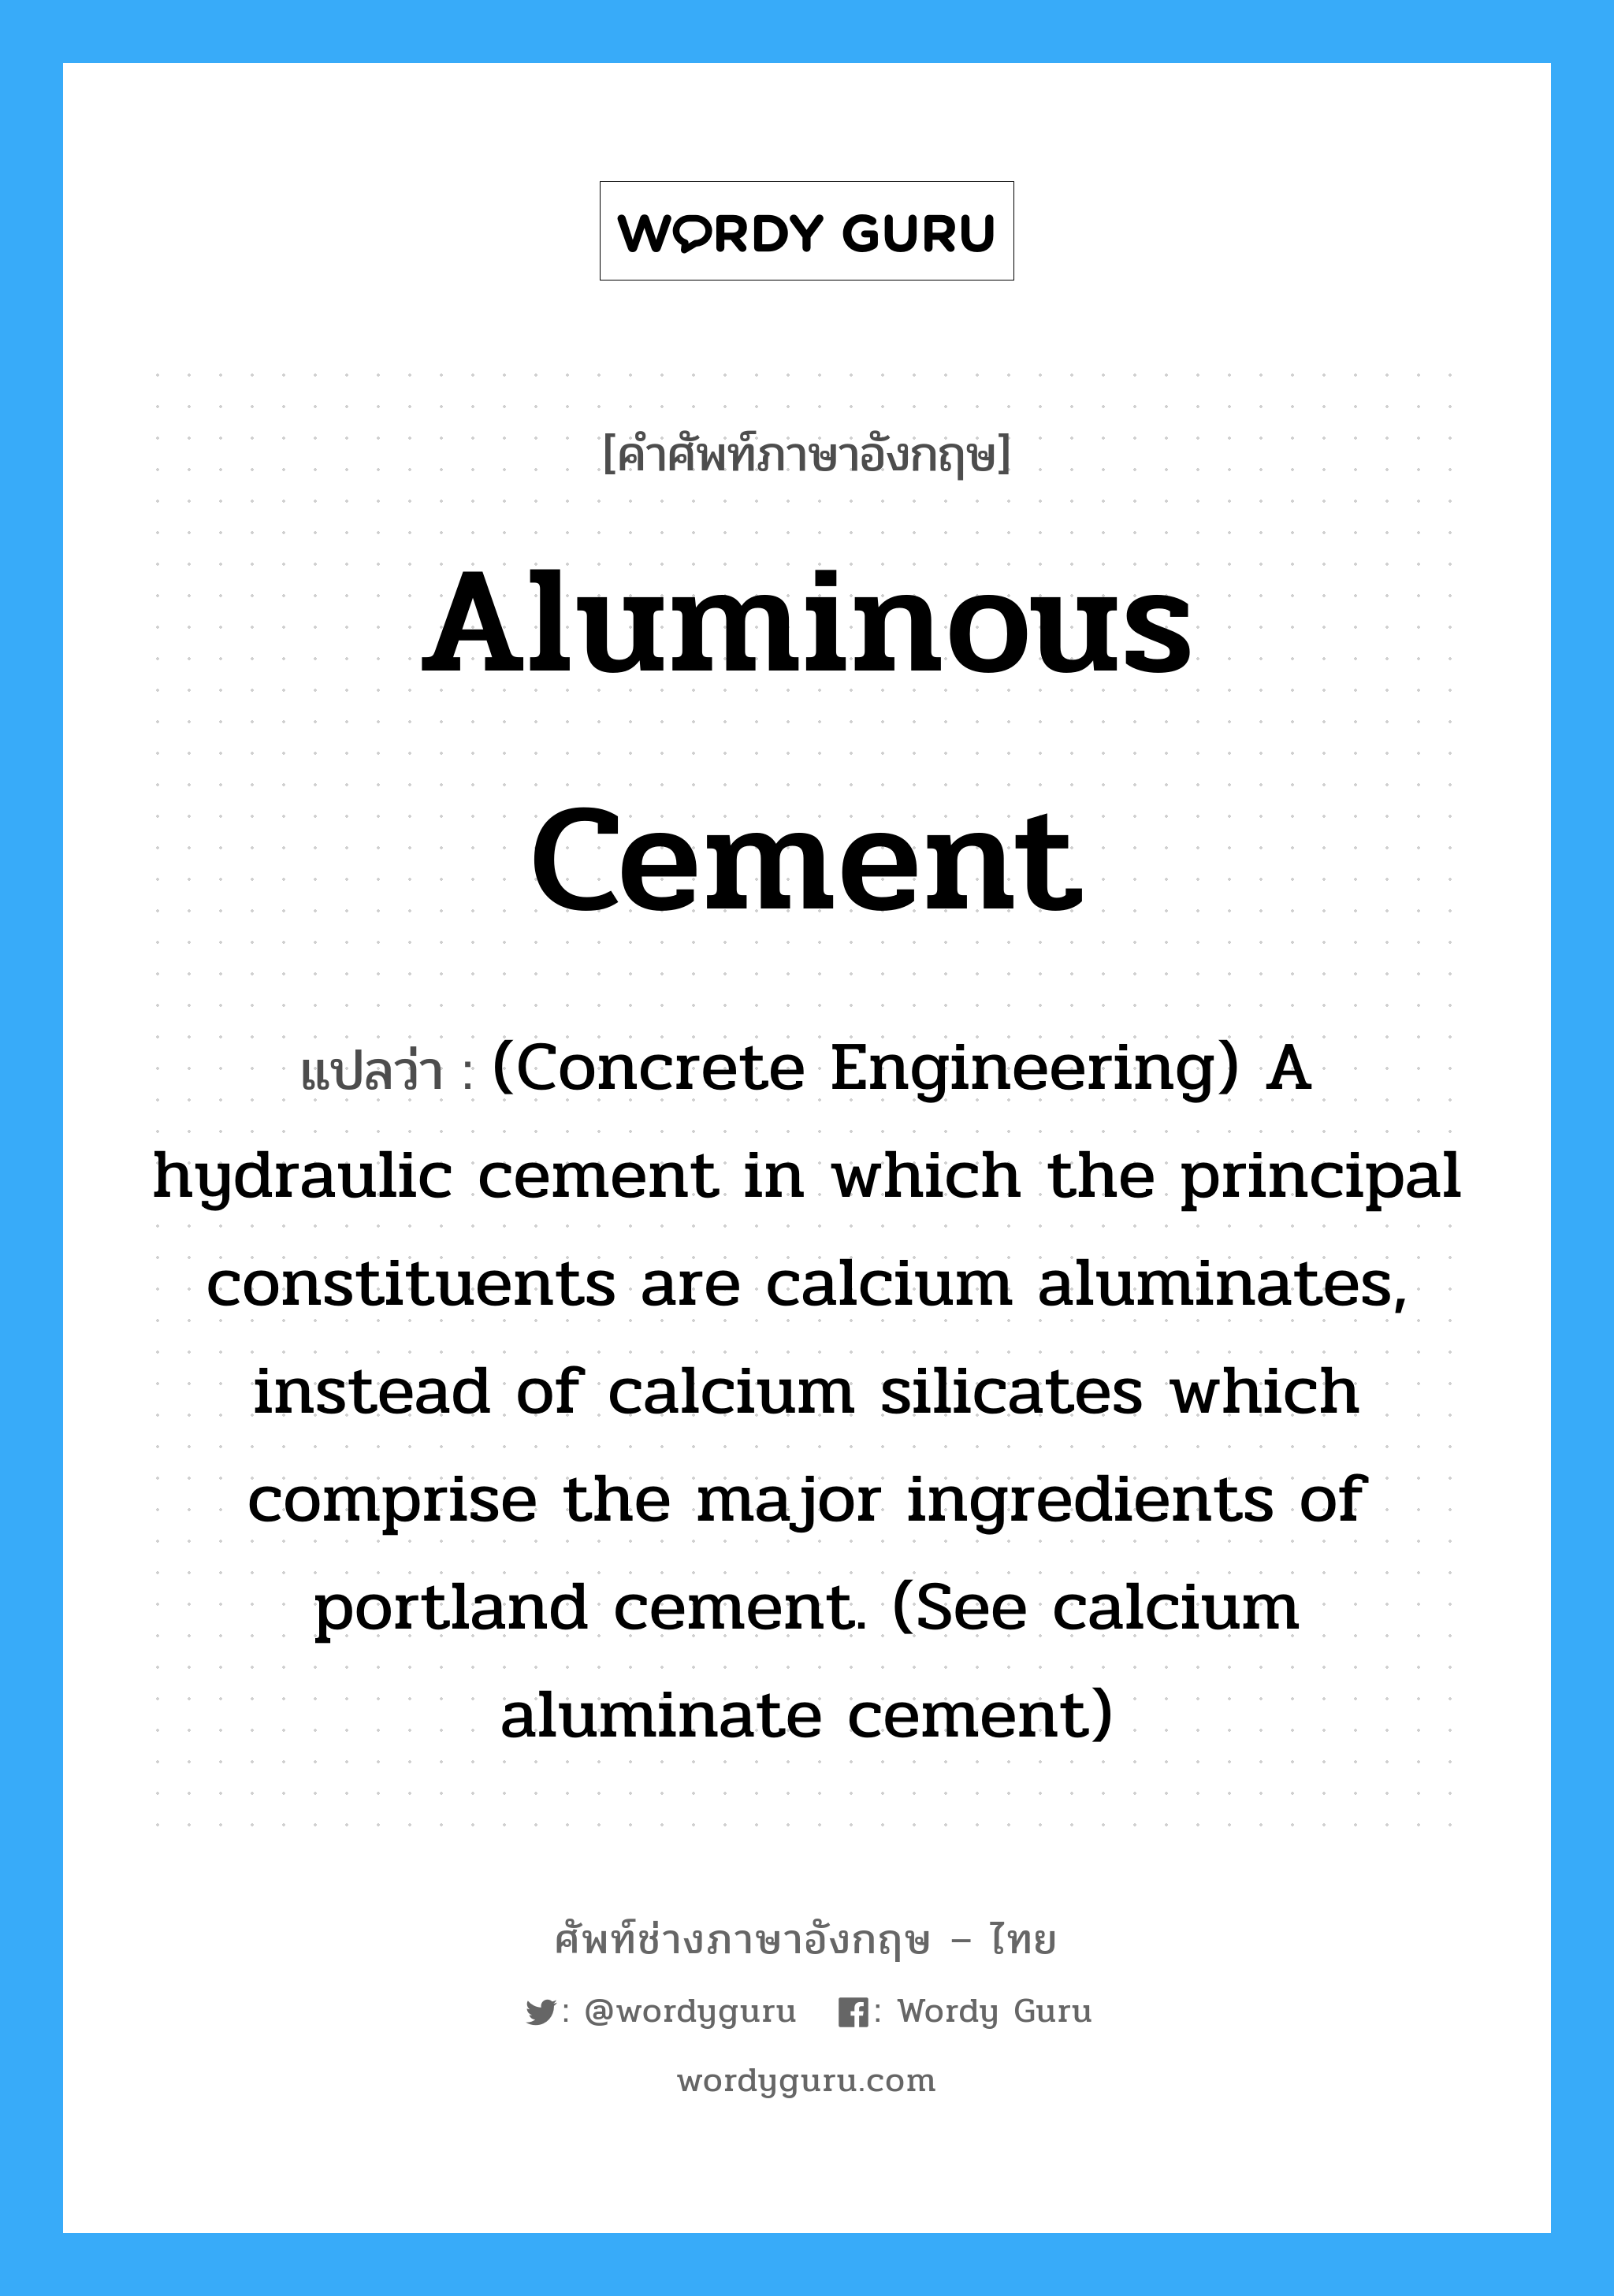 (Concrete Engineering) A hydraulic cement in which the principal constituents are calcium aluminates, instead of calcium silicates which comprise the major ingredients of portland cement. (See calcium aluminate cement) ภาษาอังกฤษ?, คำศัพท์ช่างภาษาอังกฤษ - ไทย (Concrete Engineering) A hydraulic cement in which the principal constituents are calcium aluminates, instead of calcium silicates which comprise the major ingredients of portland cement. (See calcium aluminate cement) คำศัพท์ภาษาอังกฤษ (Concrete Engineering) A hydraulic cement in which the principal constituents are calcium aluminates, instead of calcium silicates which comprise the major ingredients of portland cement. (See calcium aluminate cement) แปลว่า Aluminous Cement